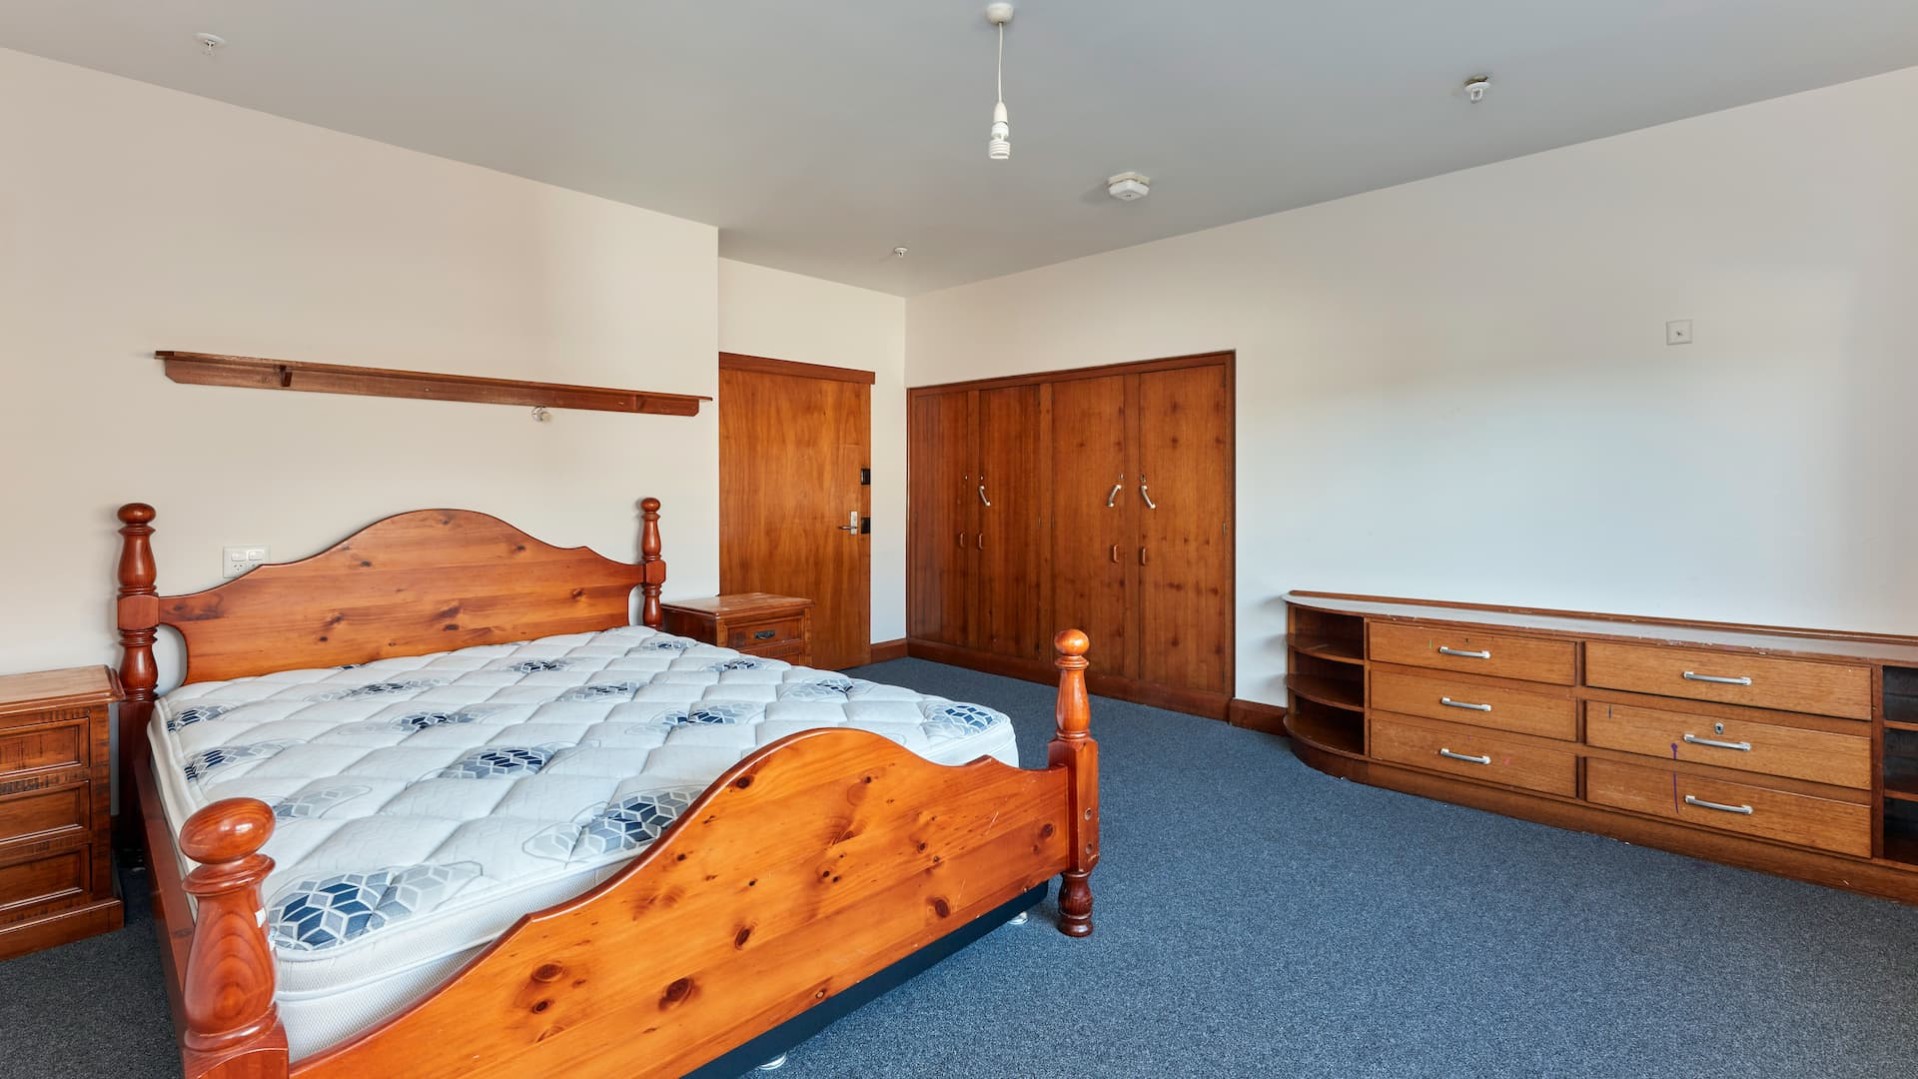 spacious bedroom, with wooden bed, mattress, wooden drawer set, side table, build in robe.